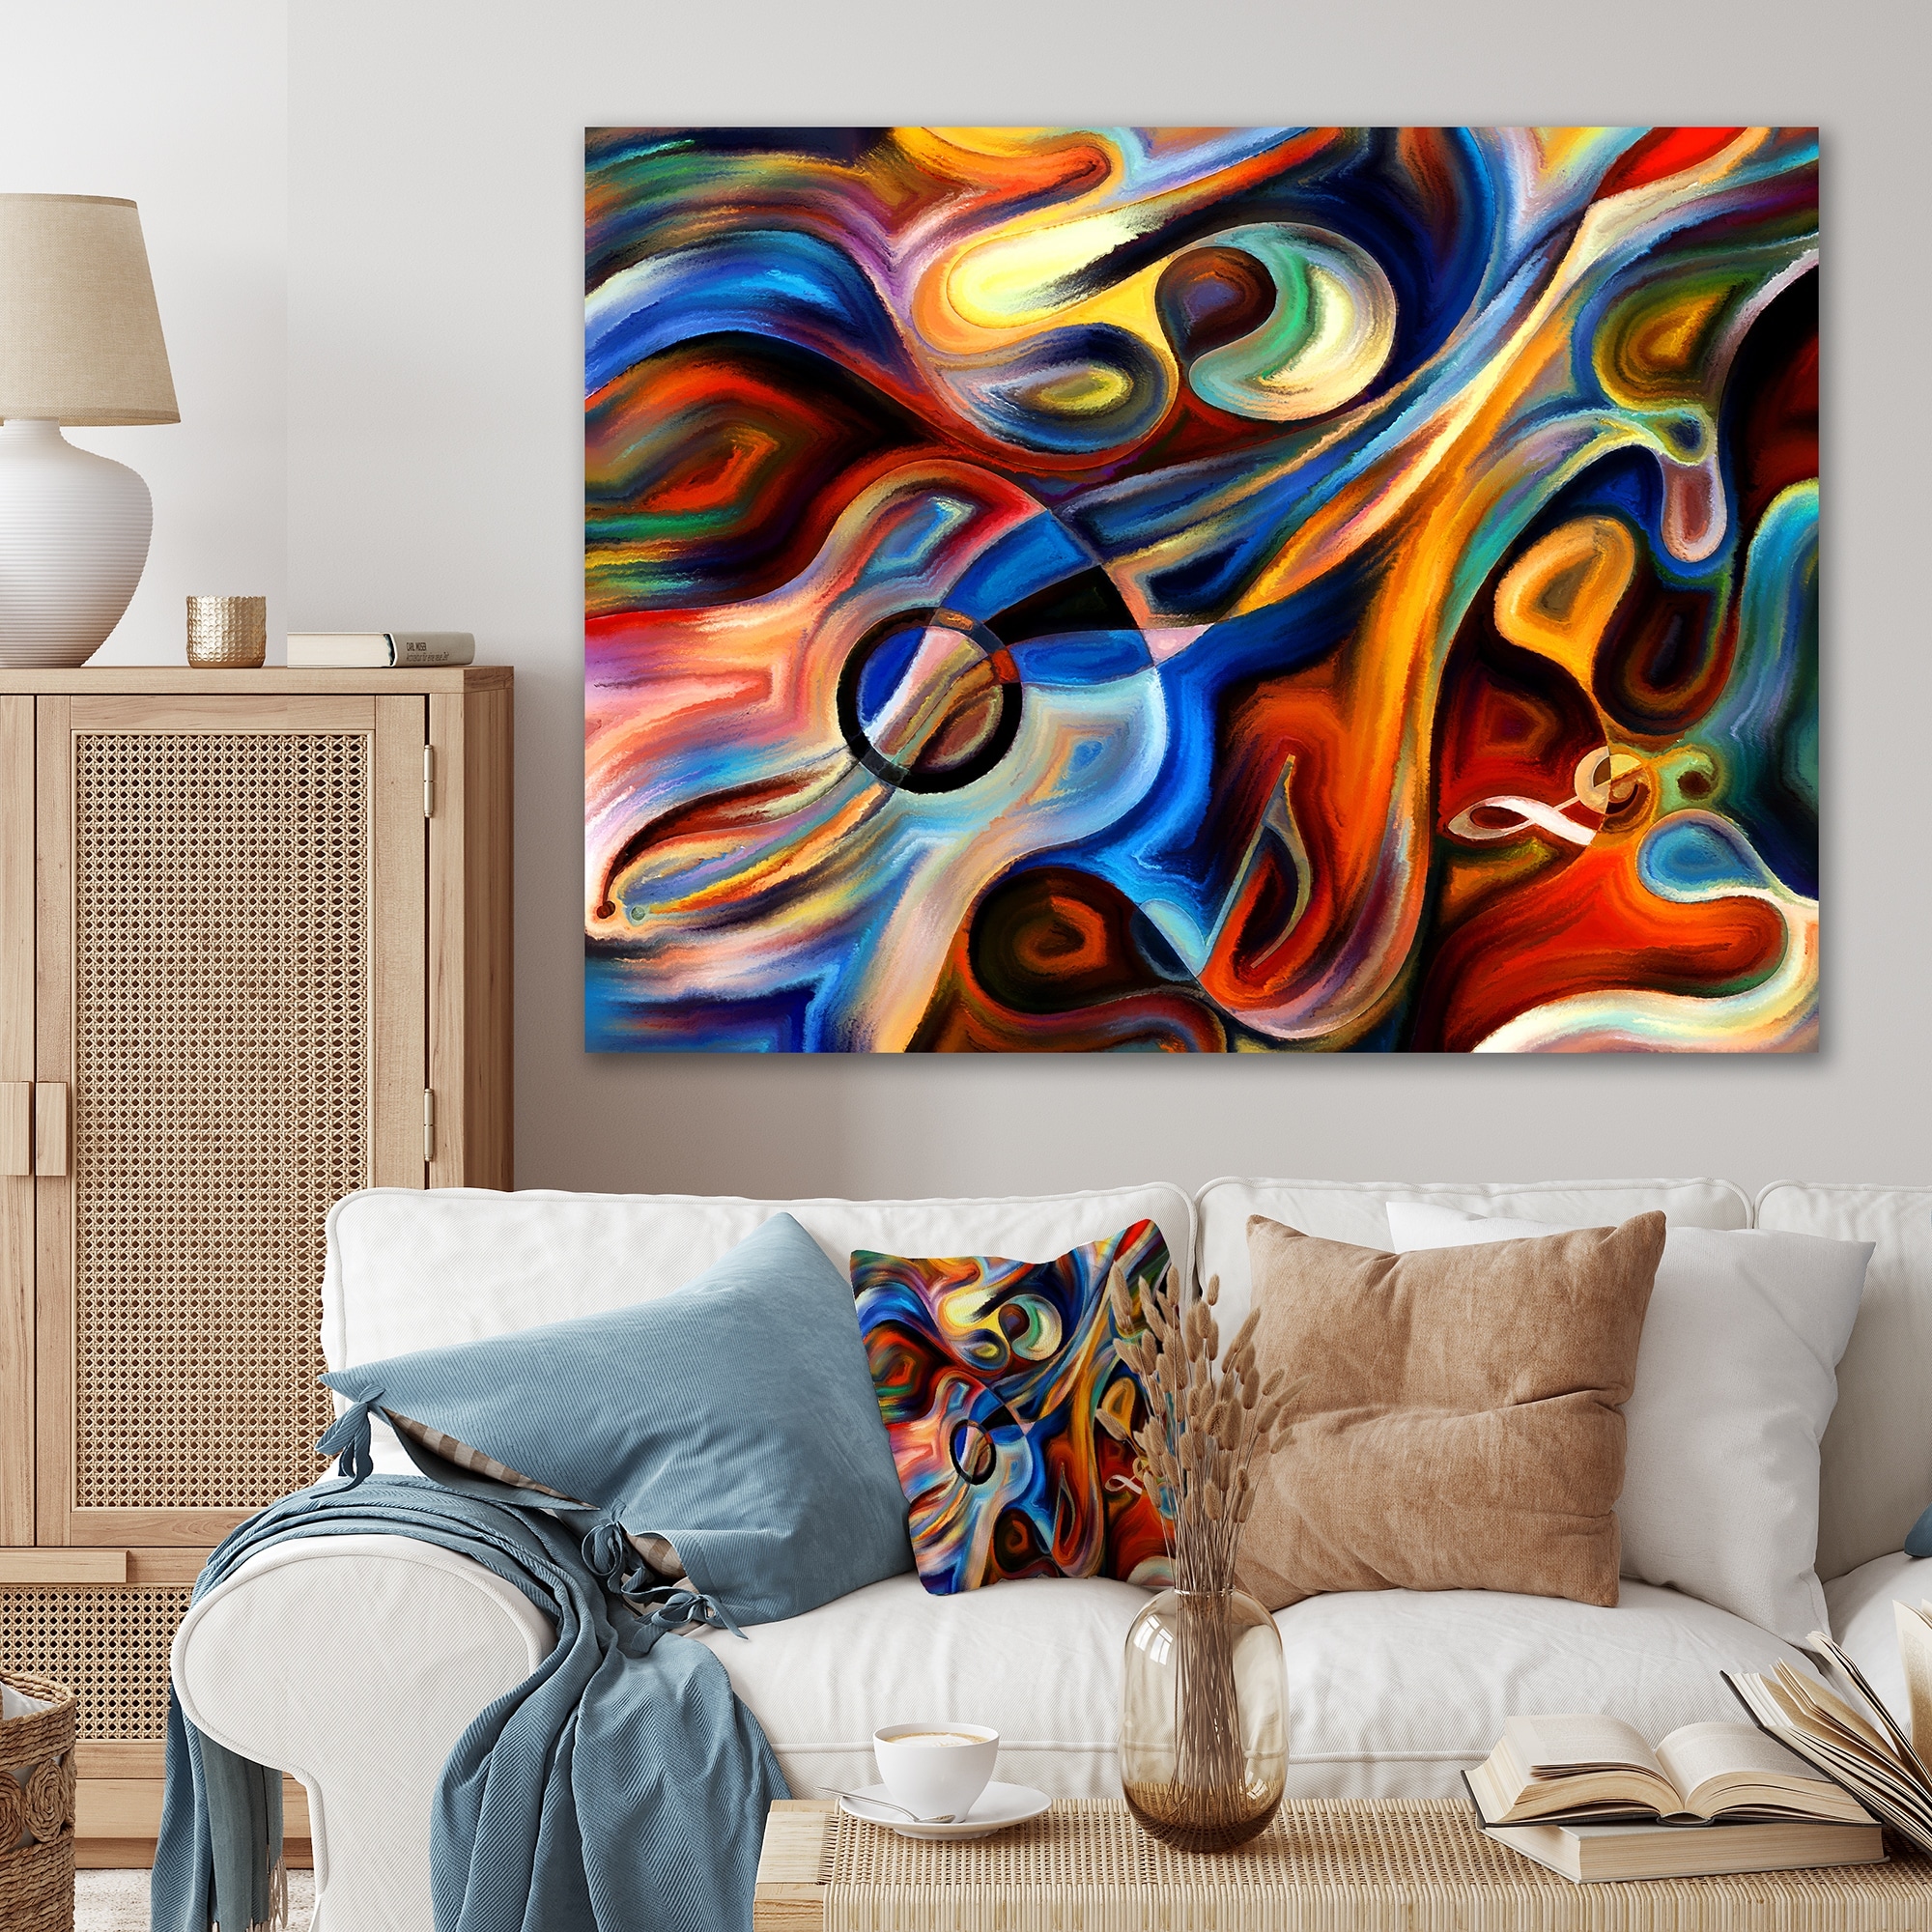 https://ak1.ostkcdn.com/images/products/is/images/direct/6c8936a438237ffb9e660c387854a78c27ad6175/Designart---Abstract-Music-and-Rhythm---Abstract-Canvas-Art-Print.jpg